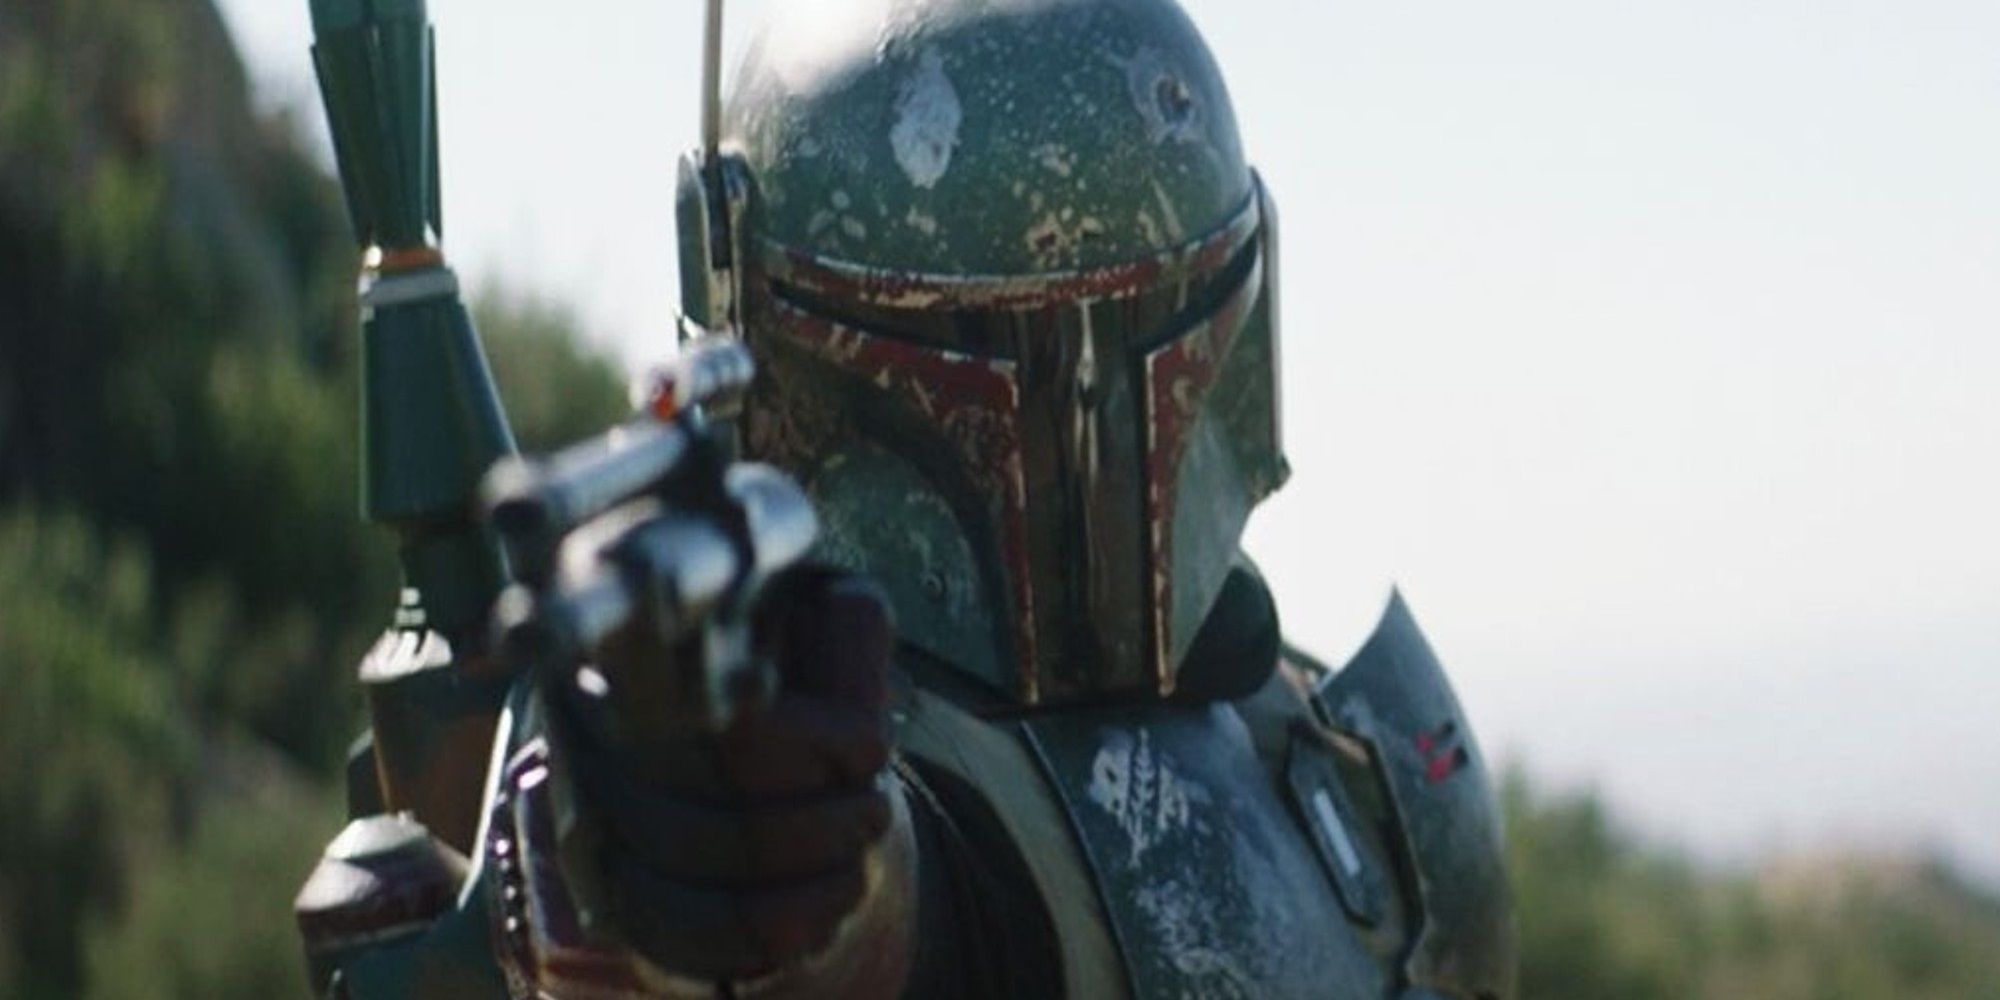 Boba Fett with a blaster in The Mandalorian Star Wars